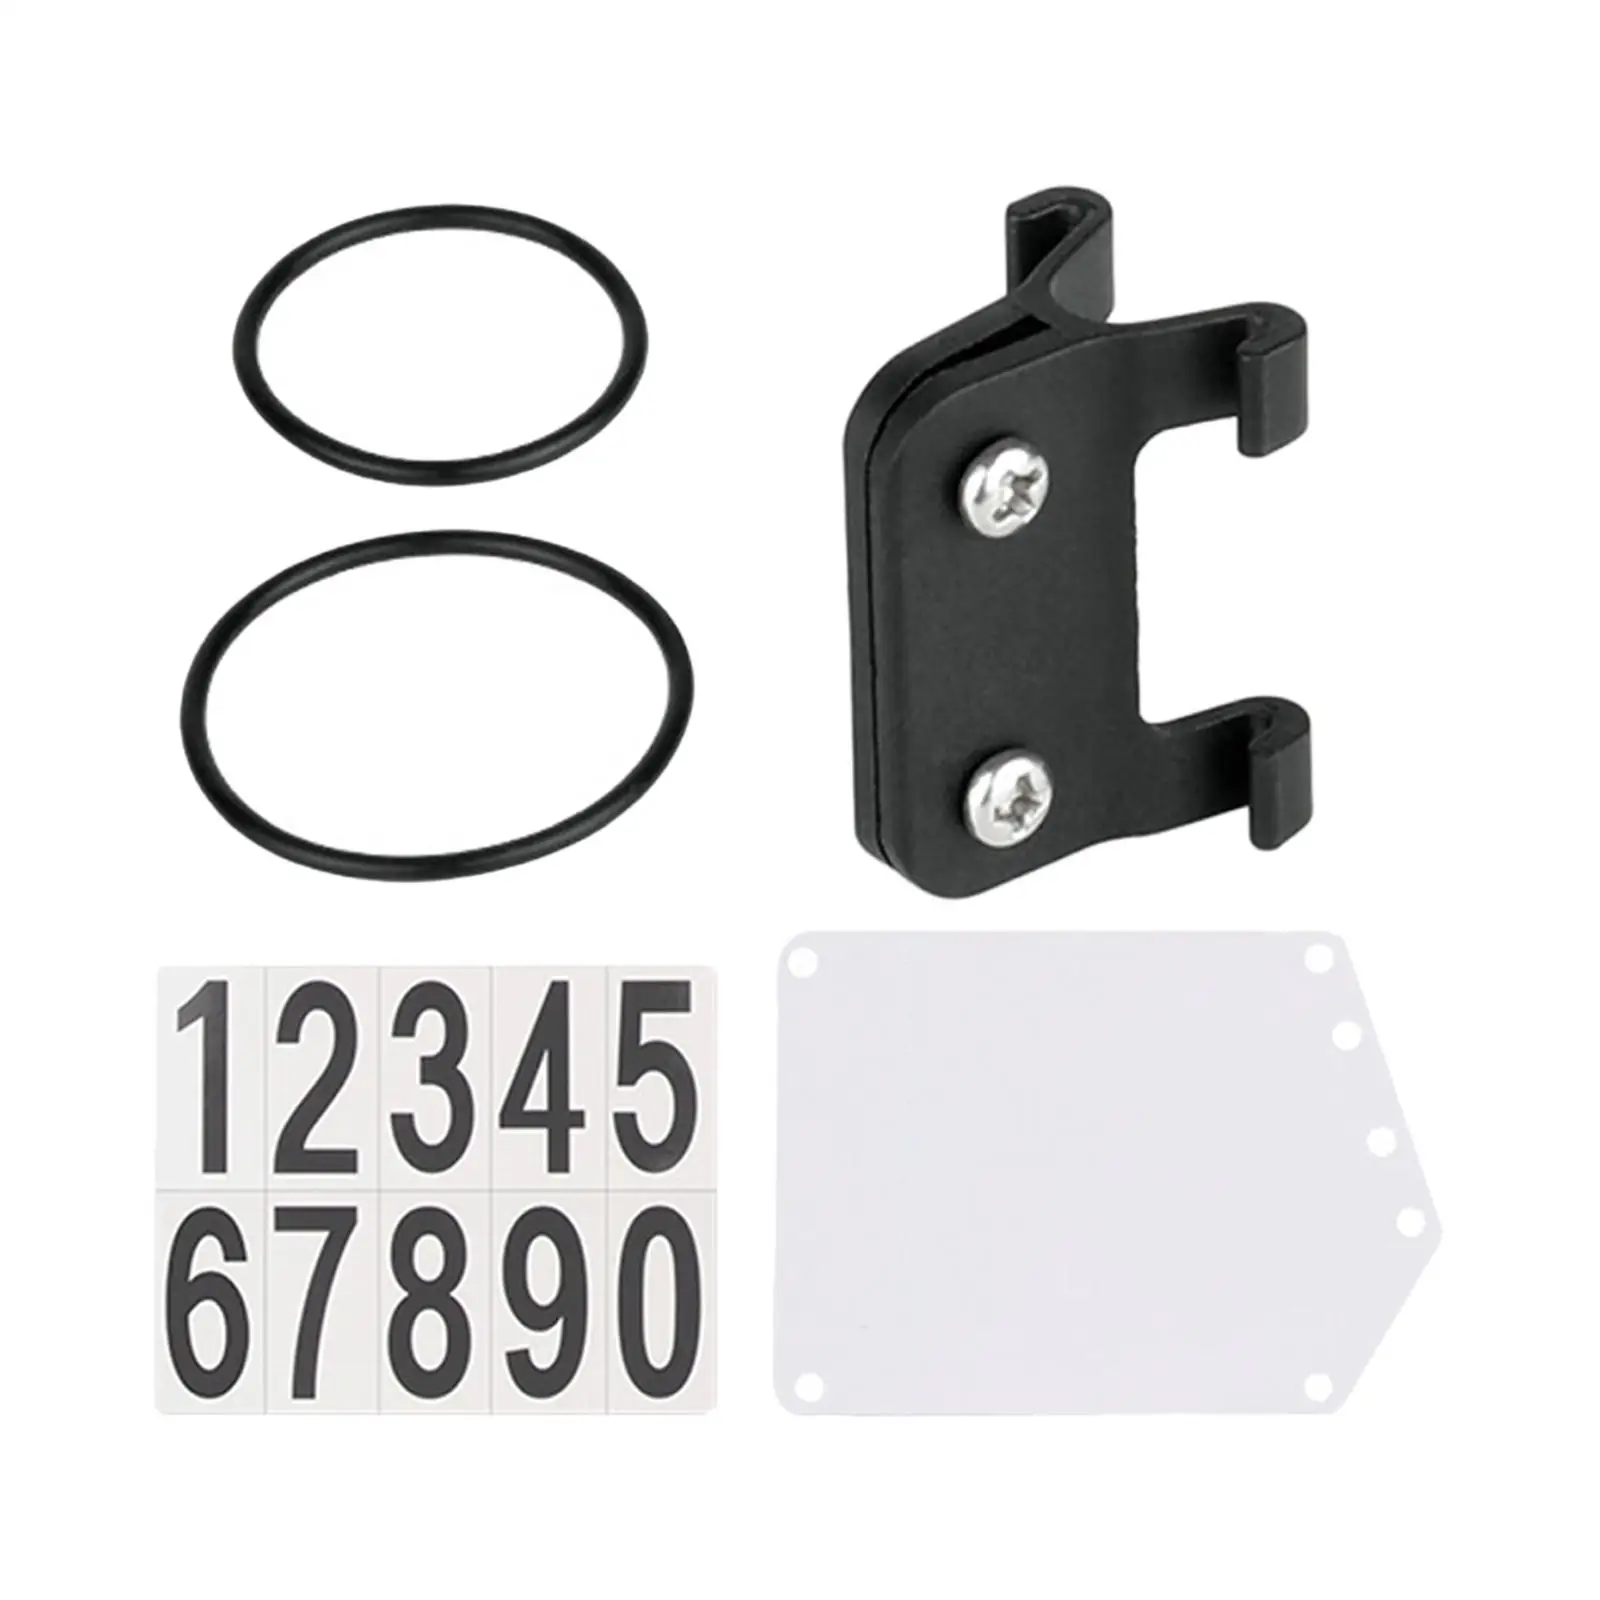 Racing Number Plate and Holder with Bands Quick Release Parts Race Cards Bracket PP for Cycling Triathlon Rear Rack Bike Racing